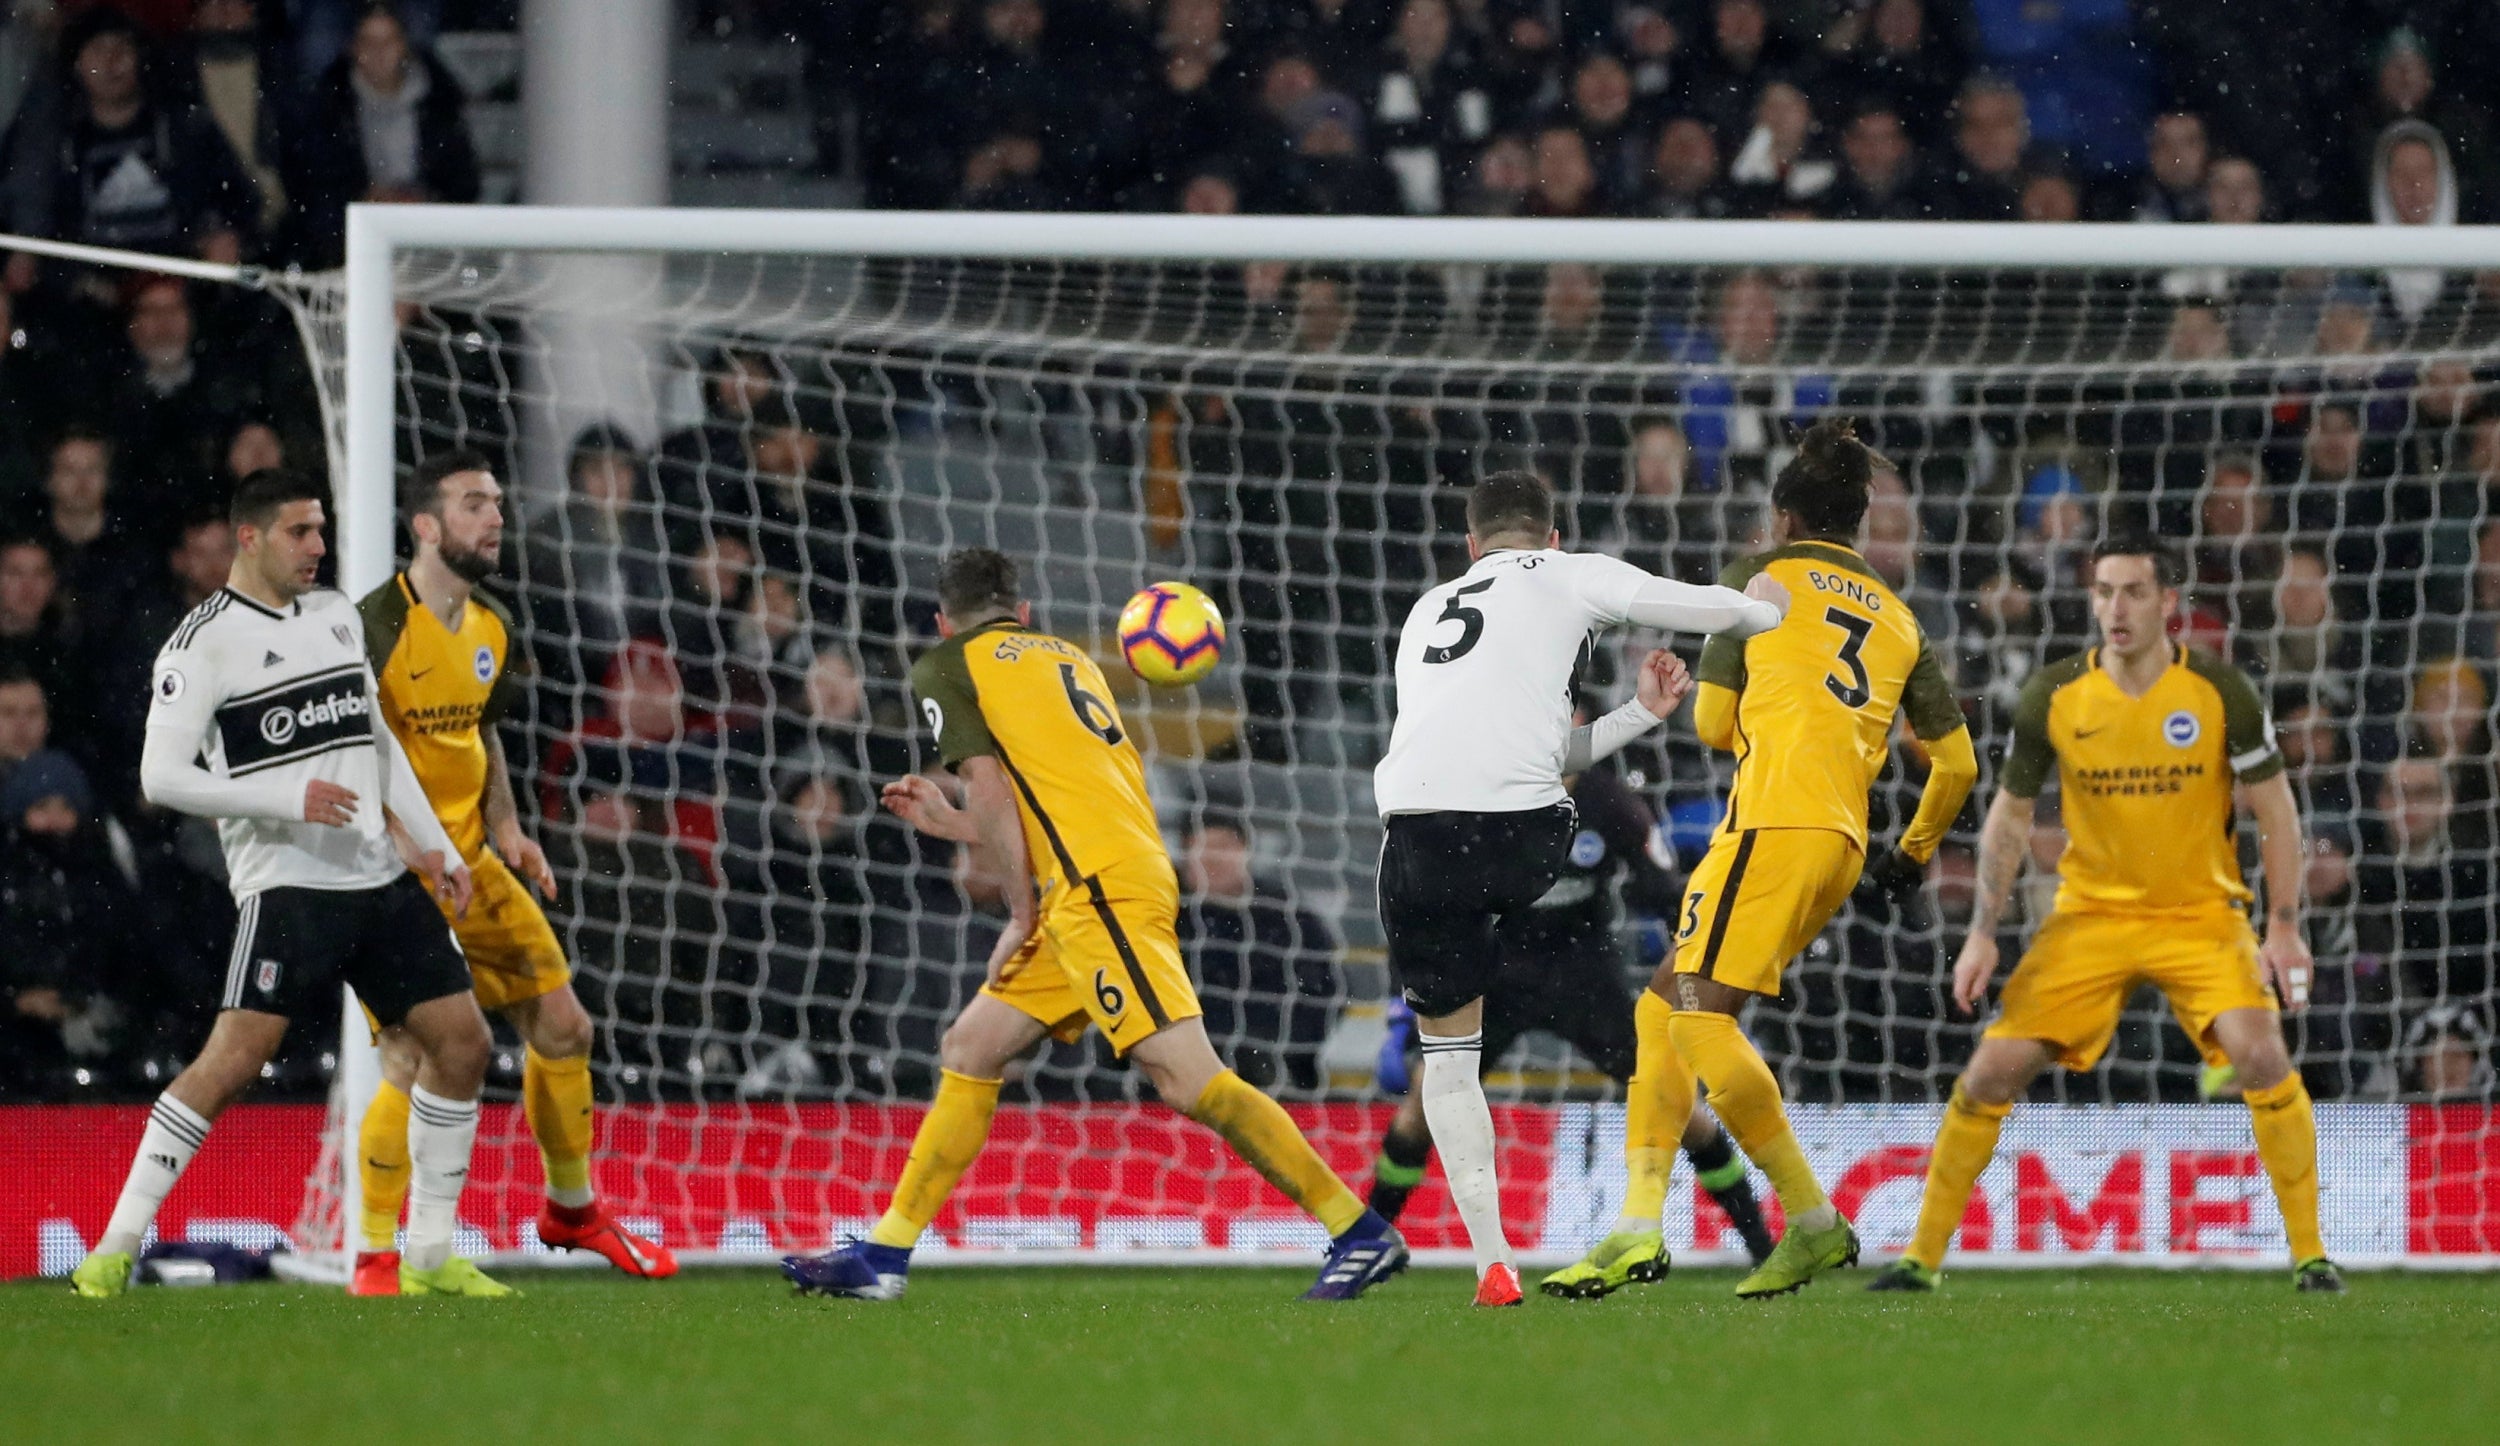 Calum Chambers fires Fulham back into the game